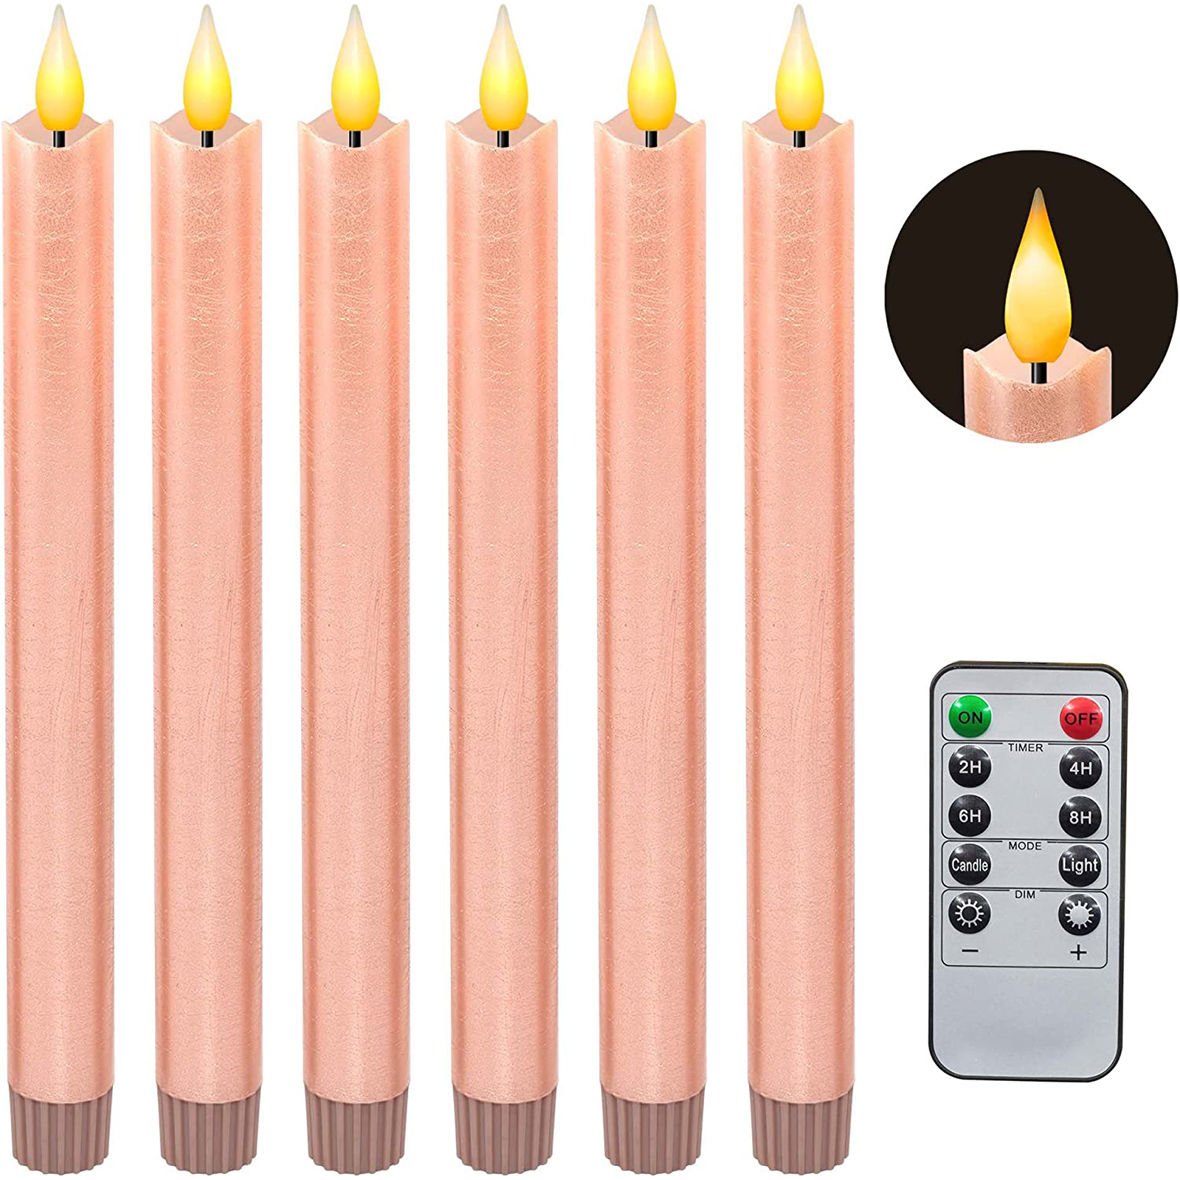 Yongmao Flameless Taper Candles Flickering Battery Operated with 10-Key Remote, Real Wax Pink LED Window Candles Electric Candles 3D Wick Warm Light 6PCS for Christmas Home Wedding Decor (Rose Gold)